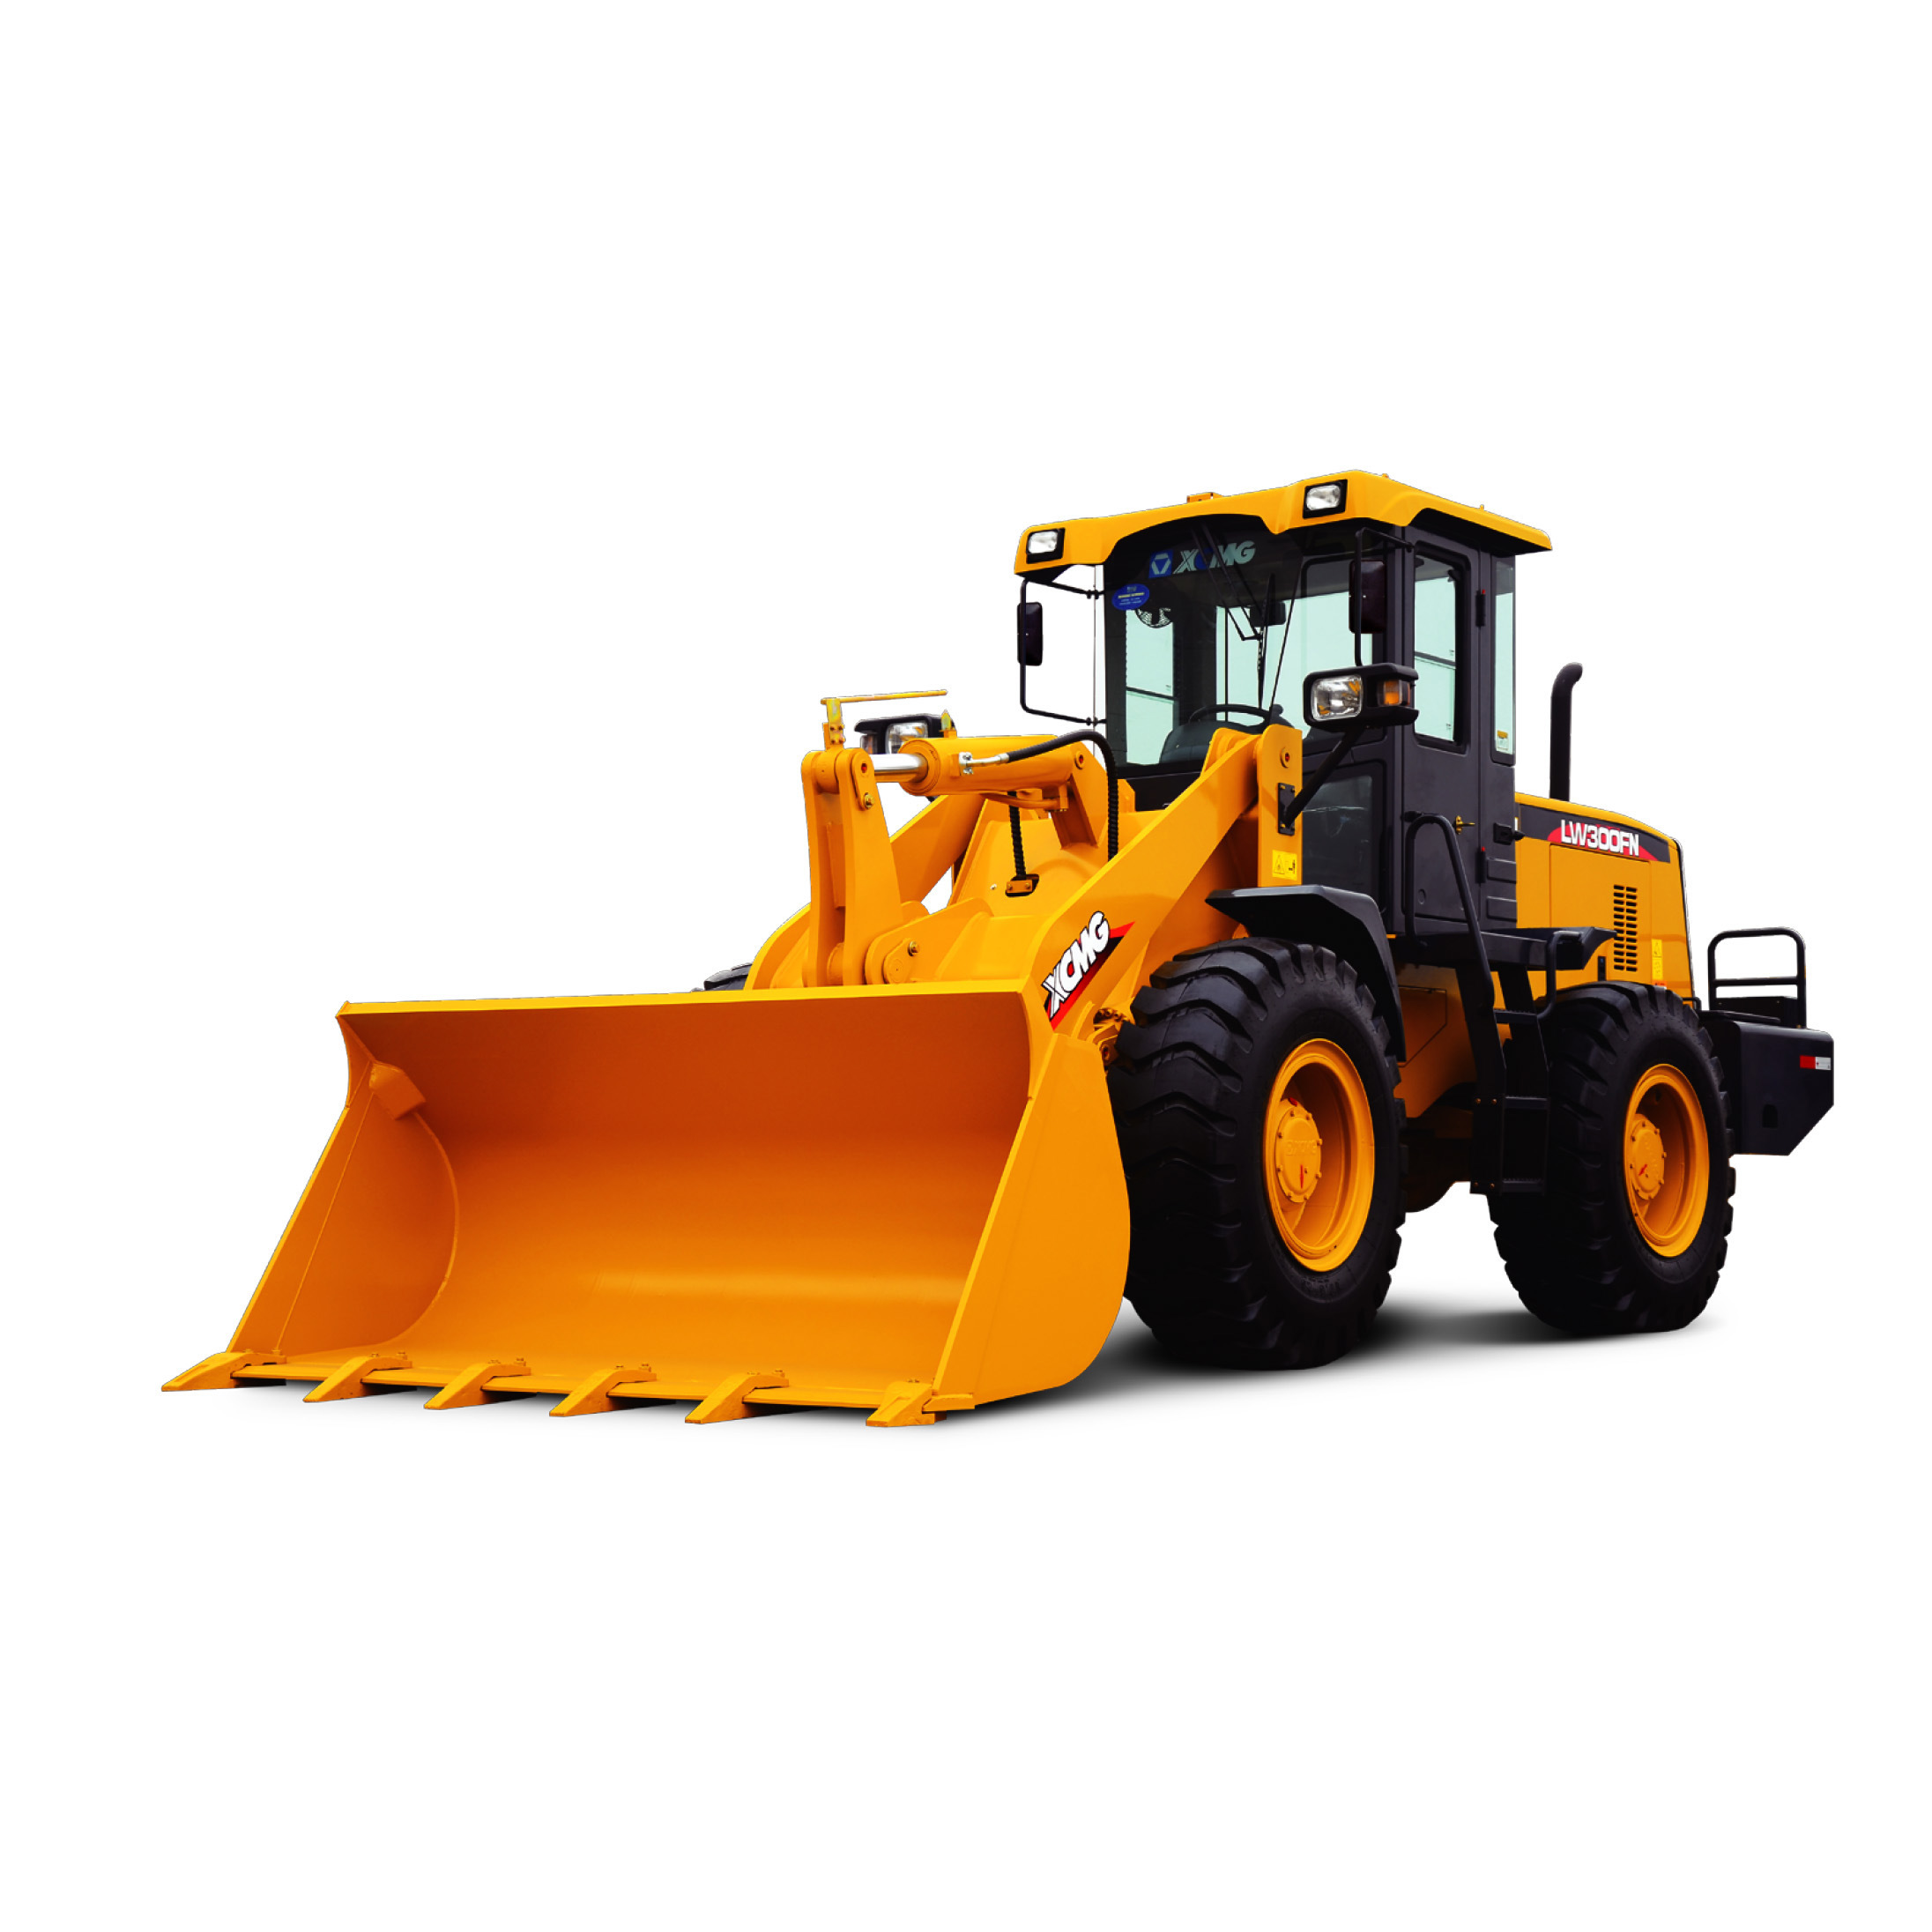 Cheap 3 Ton Wheel Loader Lw300fn China Top Brand Small Front End Loader Machine with Spare Parts Price List for Sale